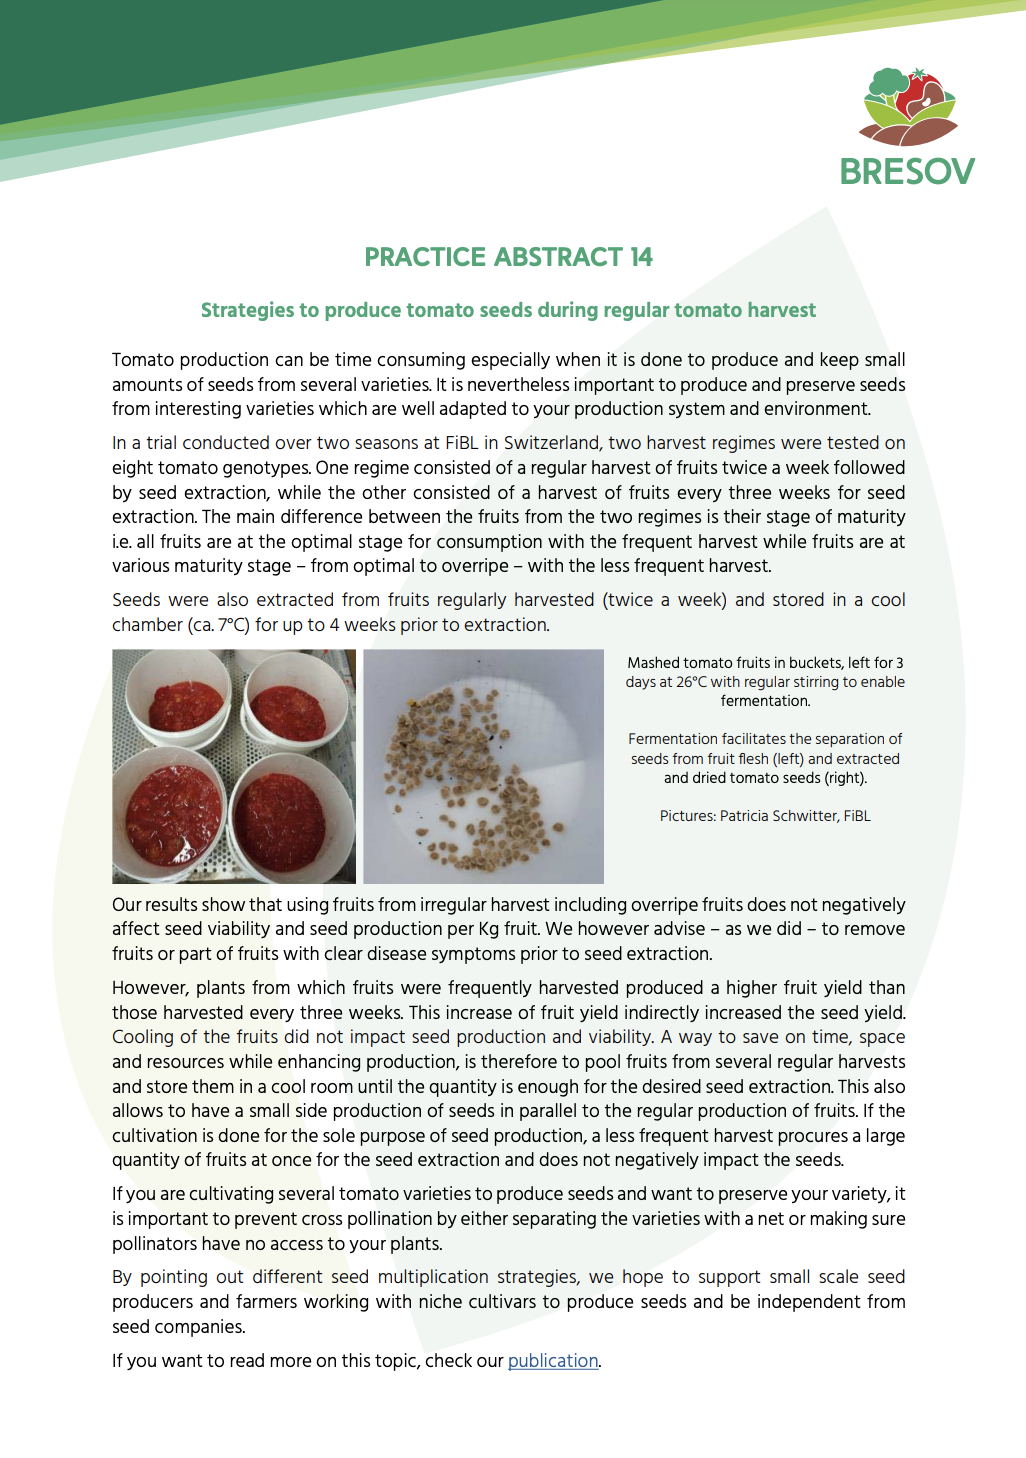 Strategies to produce tomato seeds during regular tomato harvest (BRESOV Practice Abstract)